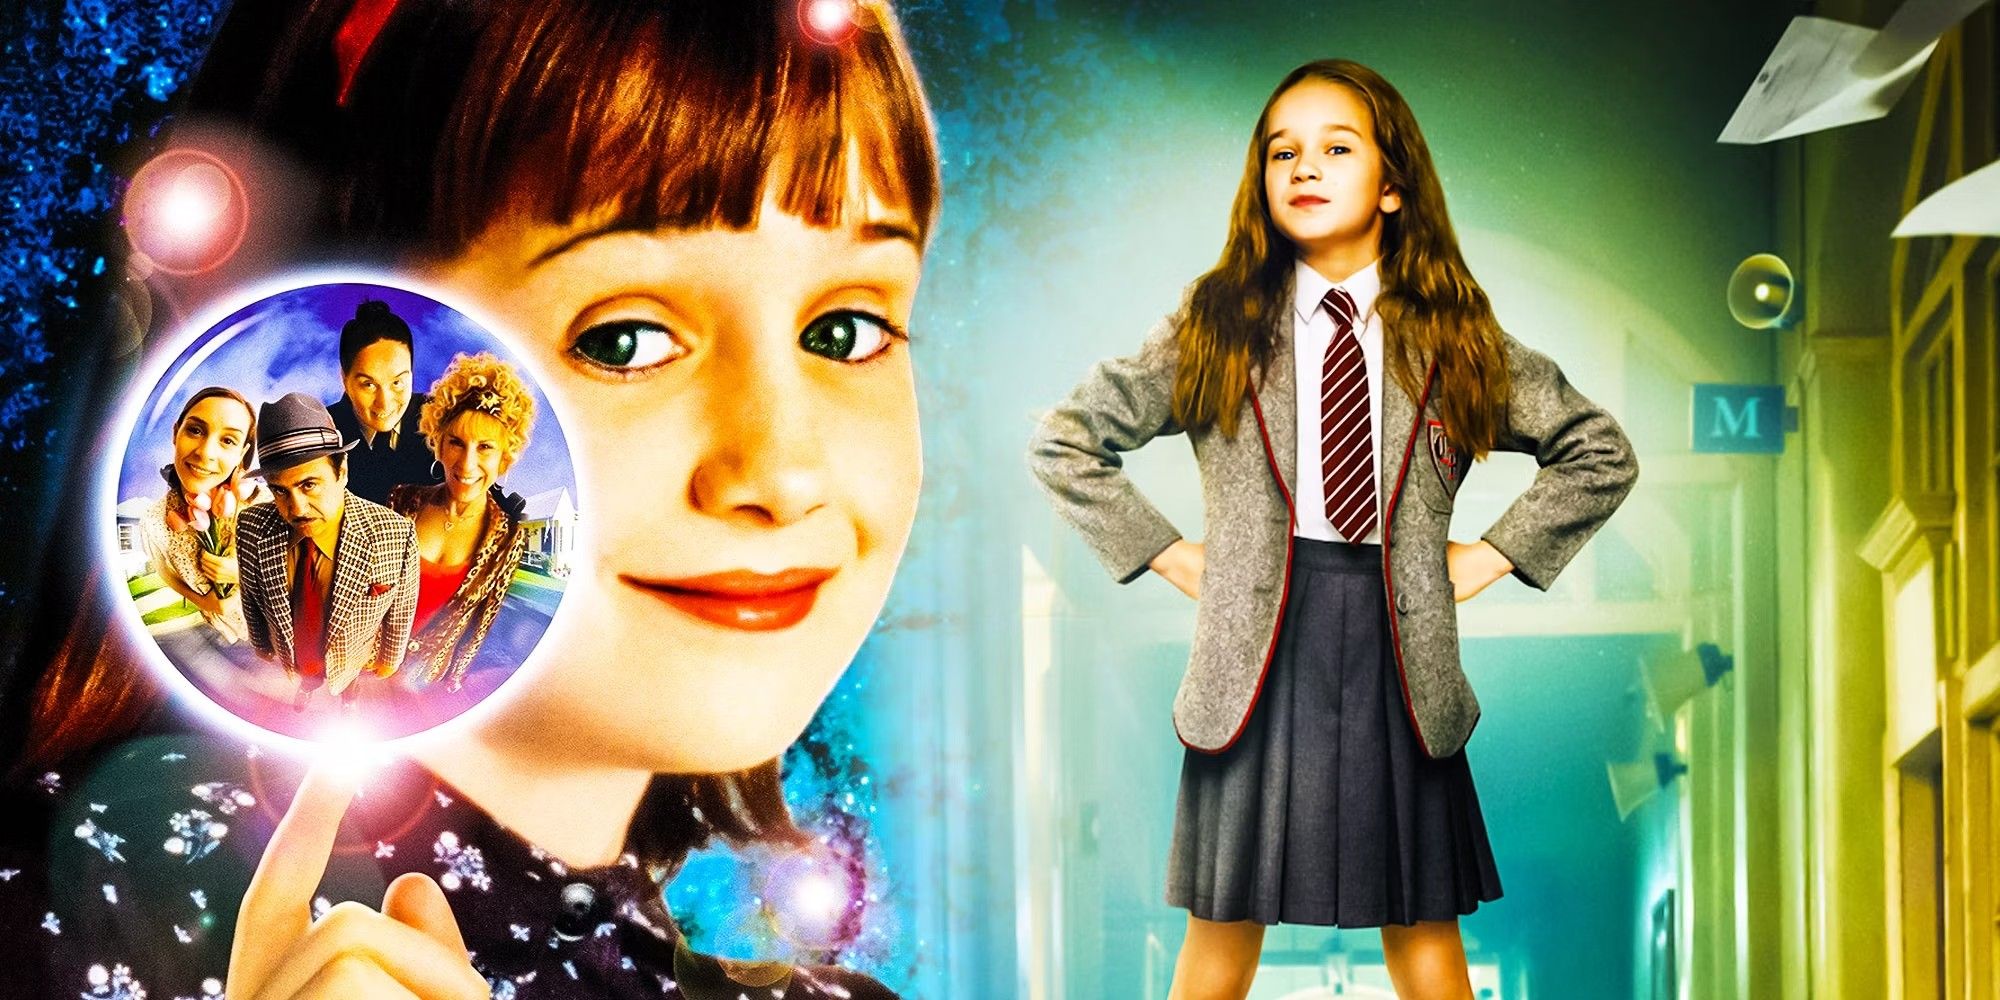 How Old Matilda Is In The Movie & Musical